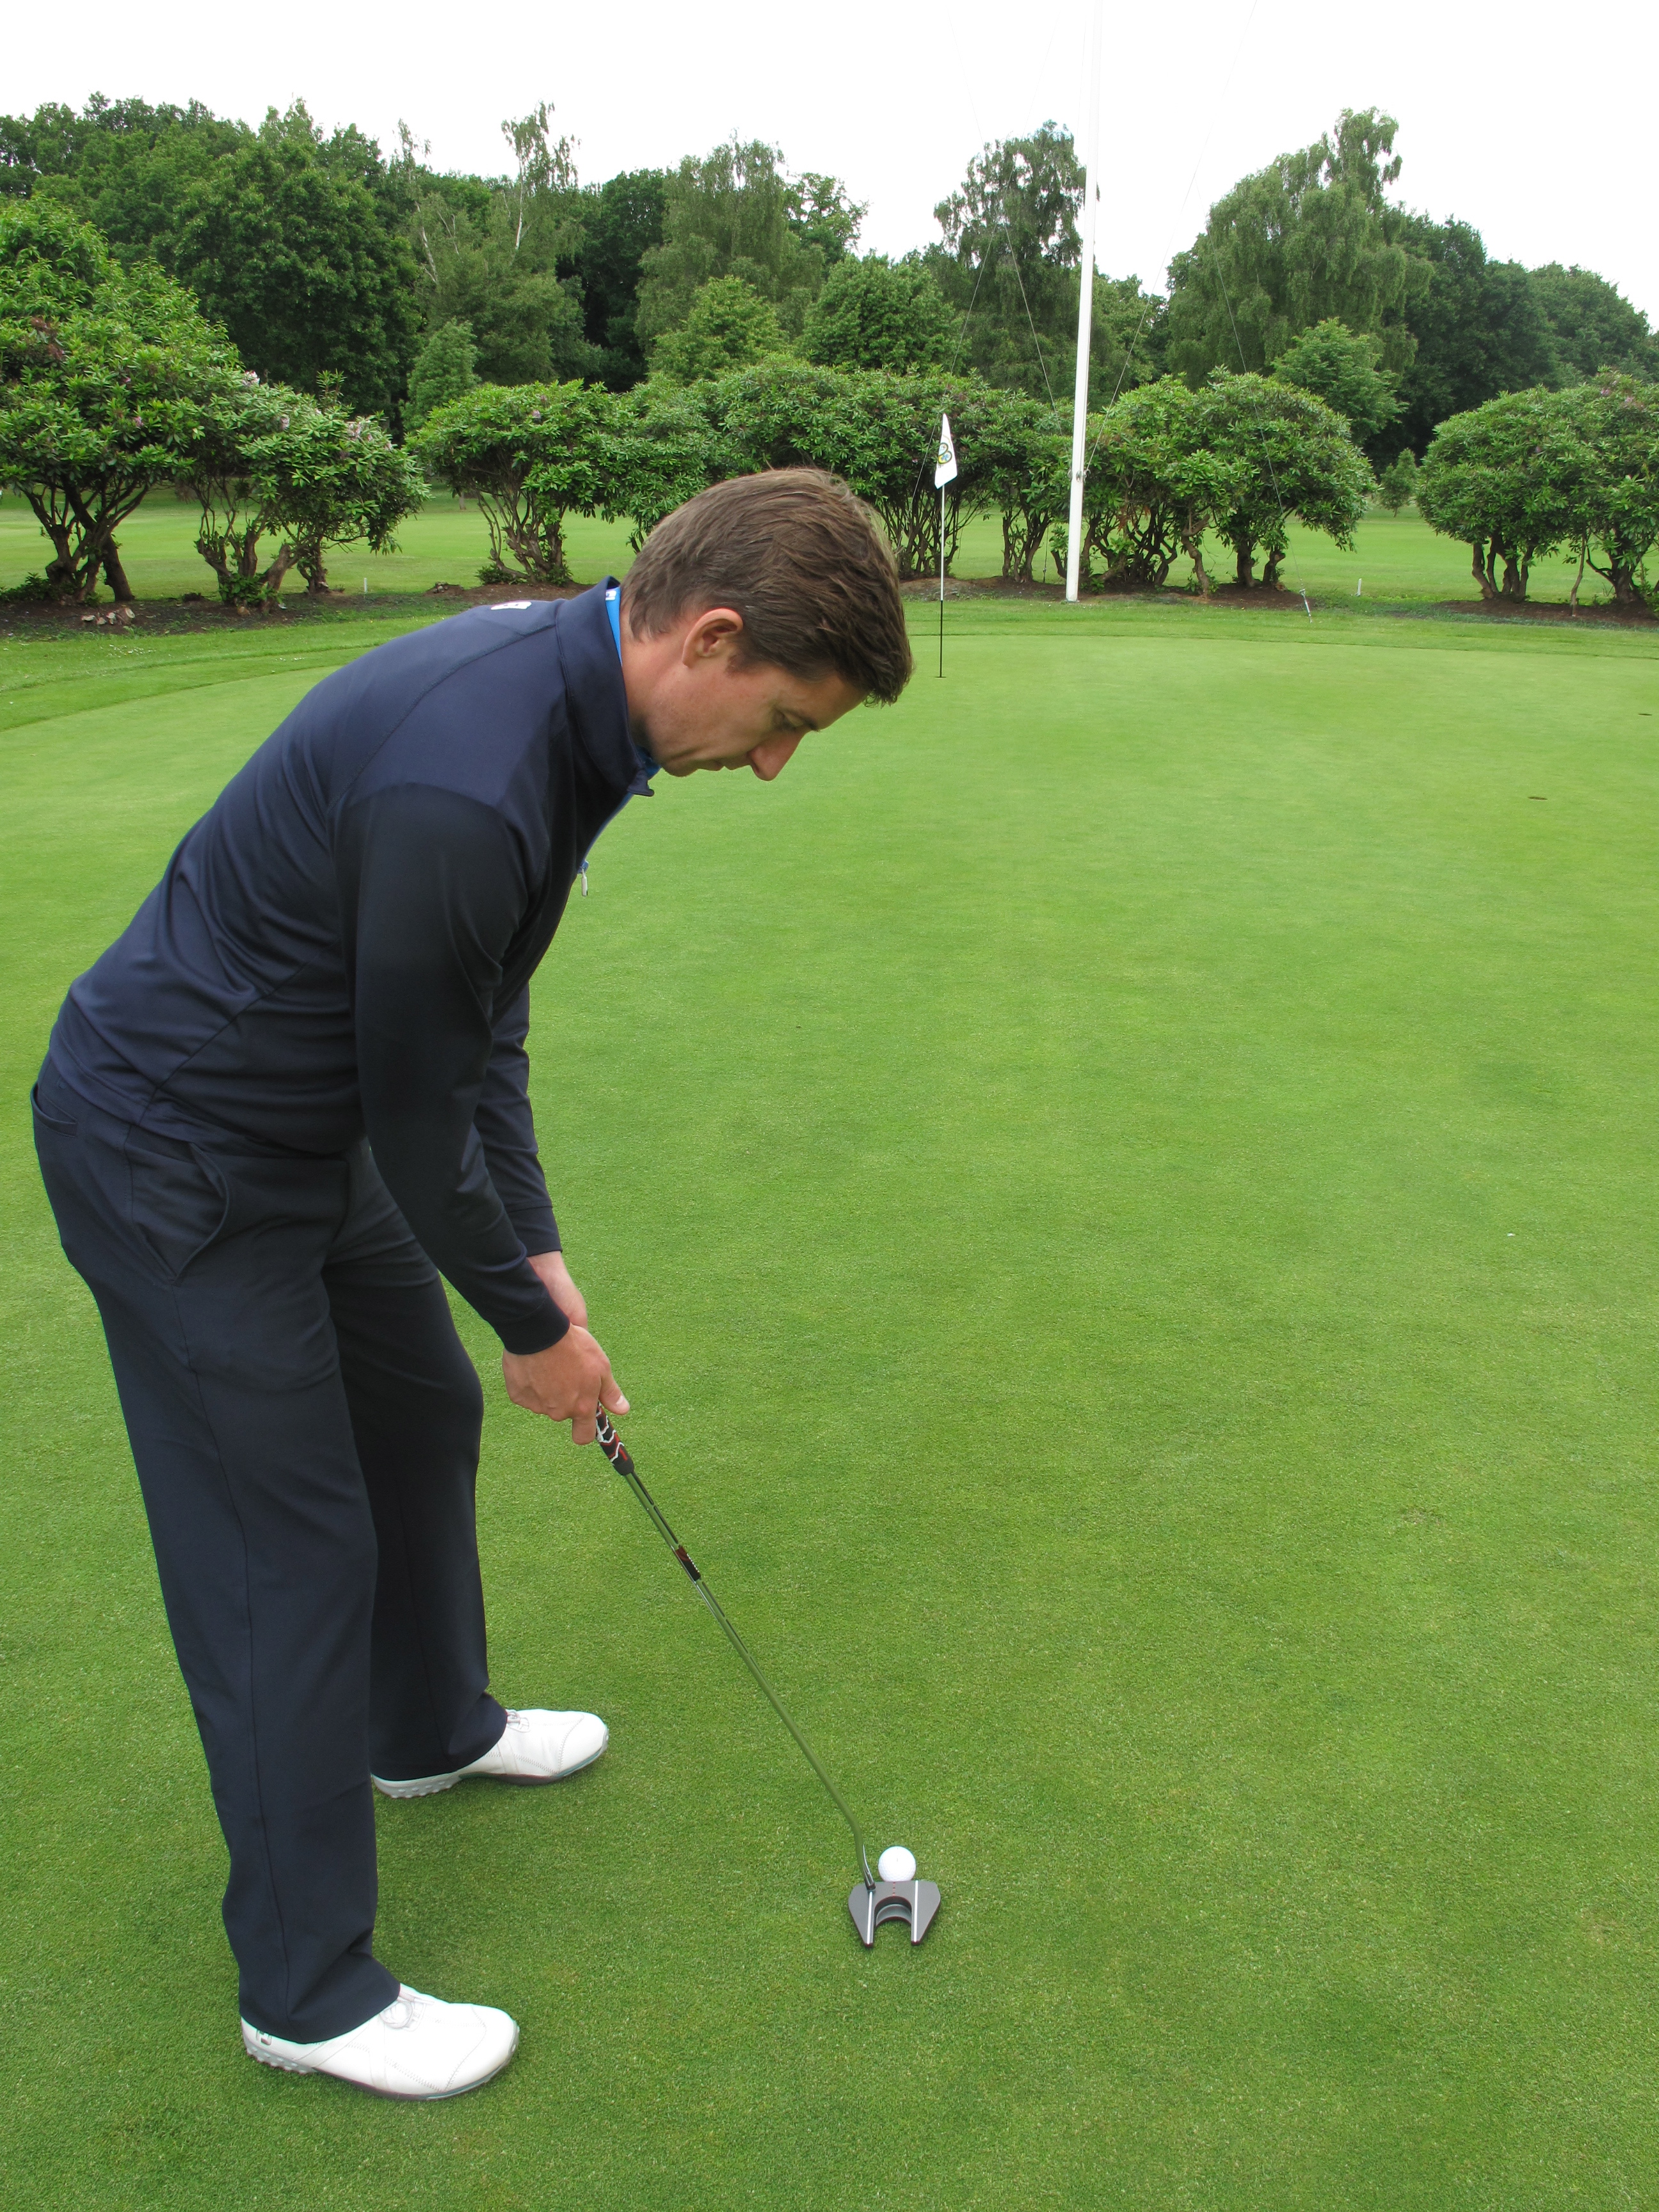 The long putt is one of golf's toughest challenges, so how do you play it?